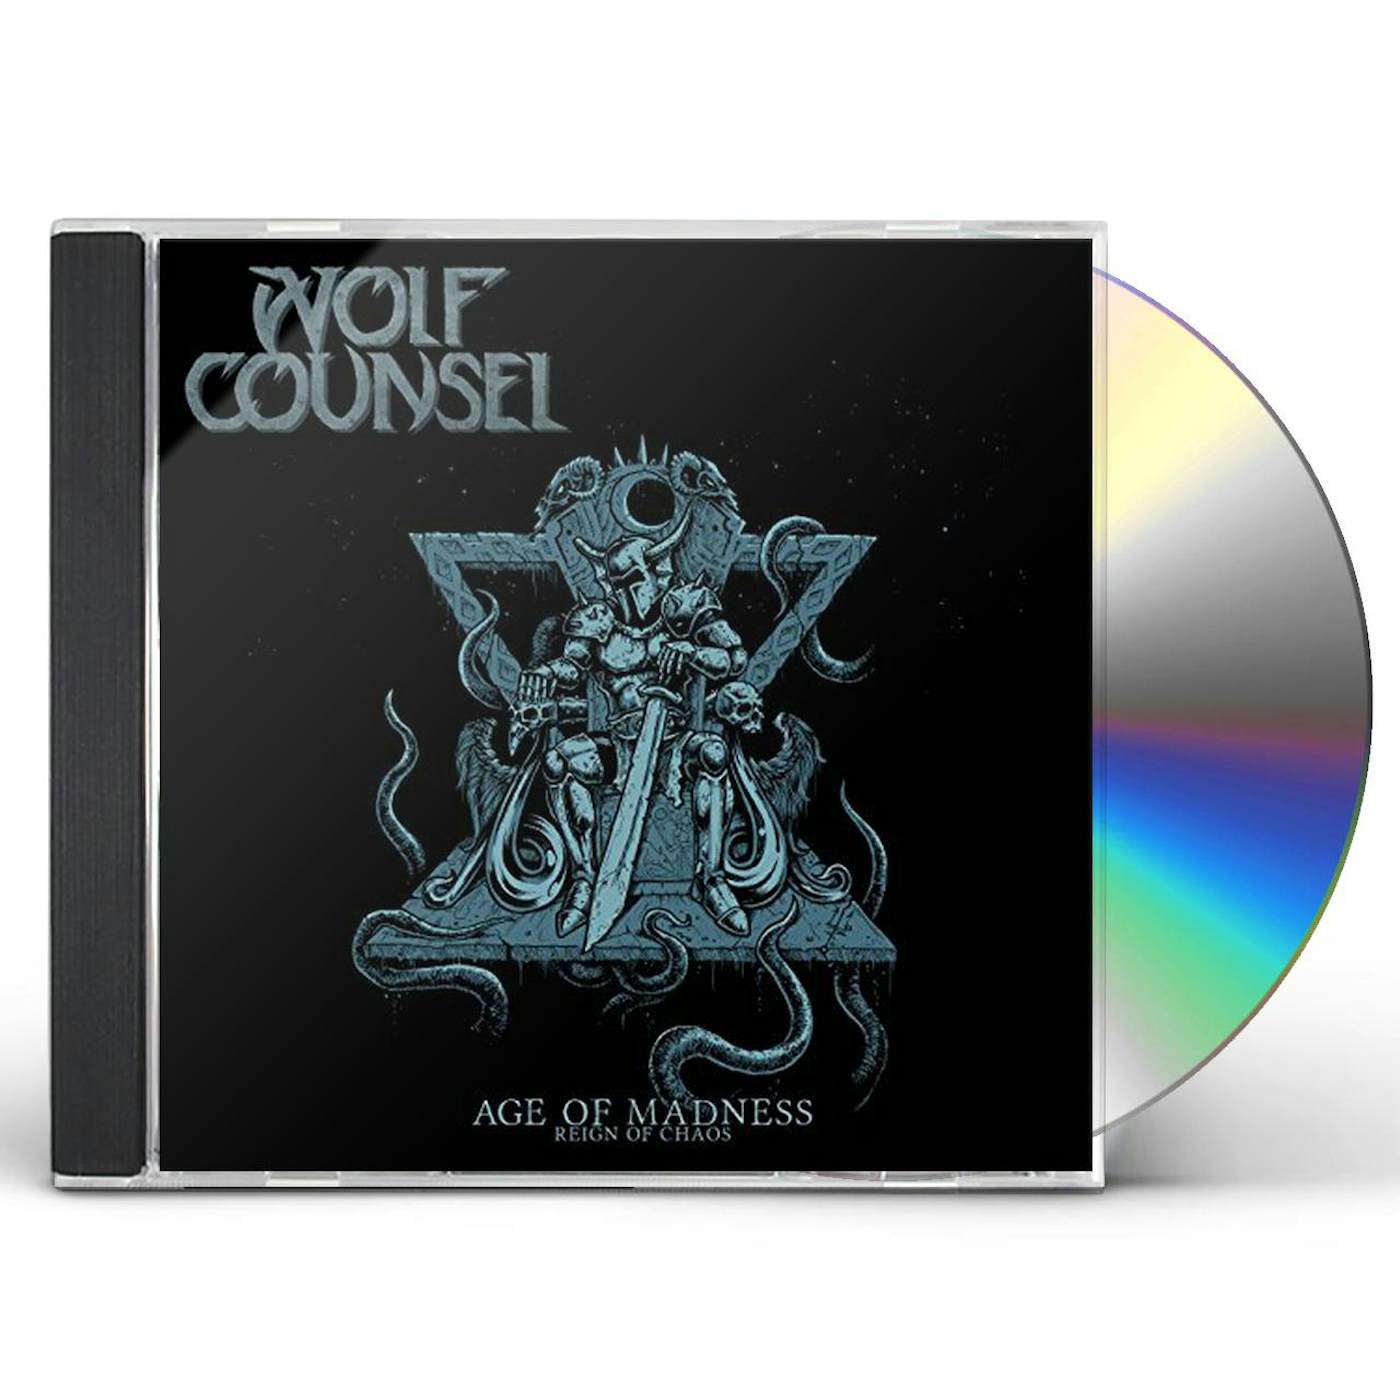 Wolf Counsel AGE OF MADNESS / REIGN OF CHAOS CD